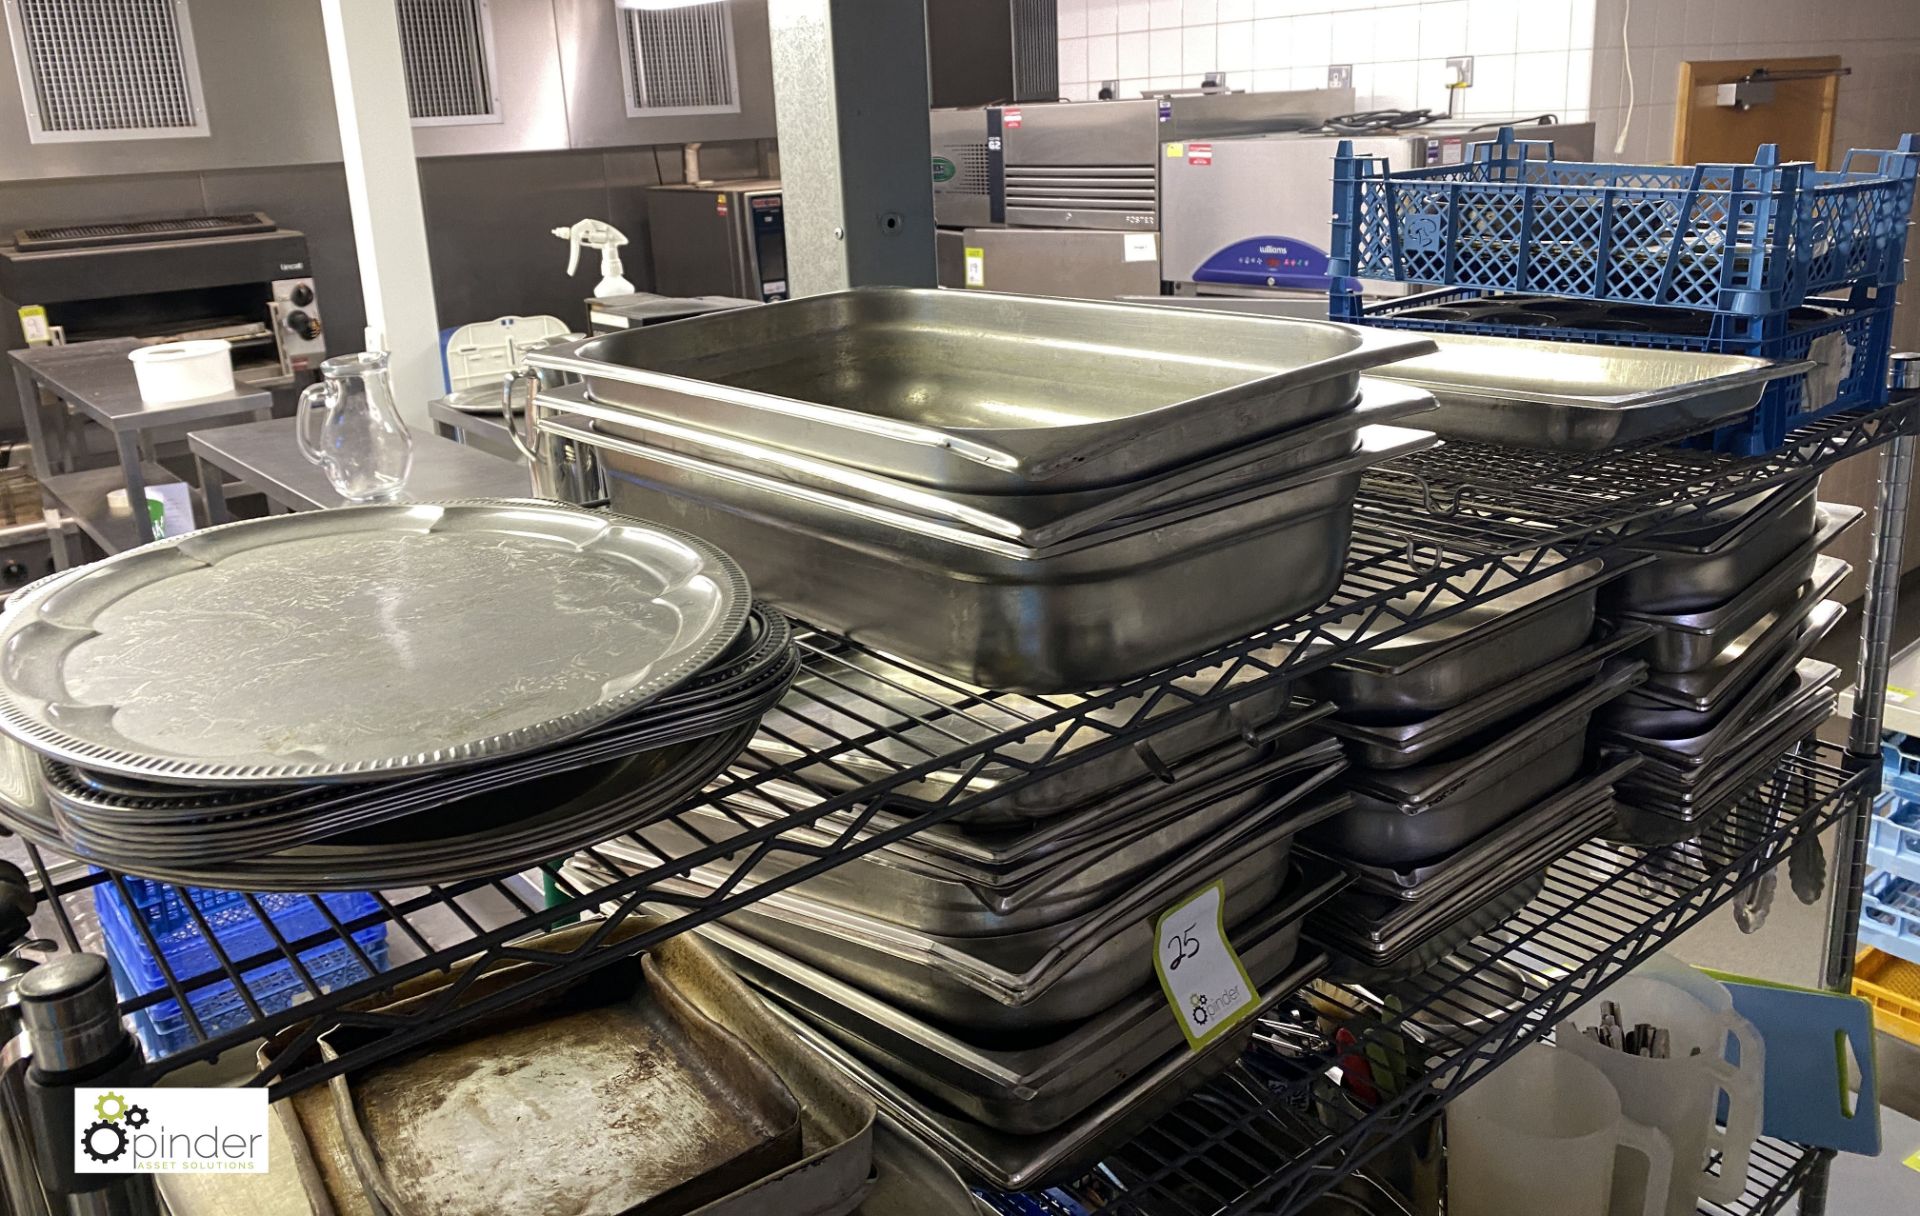 Large quantity Cooking Pots, Oven Trays, Utensils, etc, to rack (located in Kitchen) - Image 3 of 10